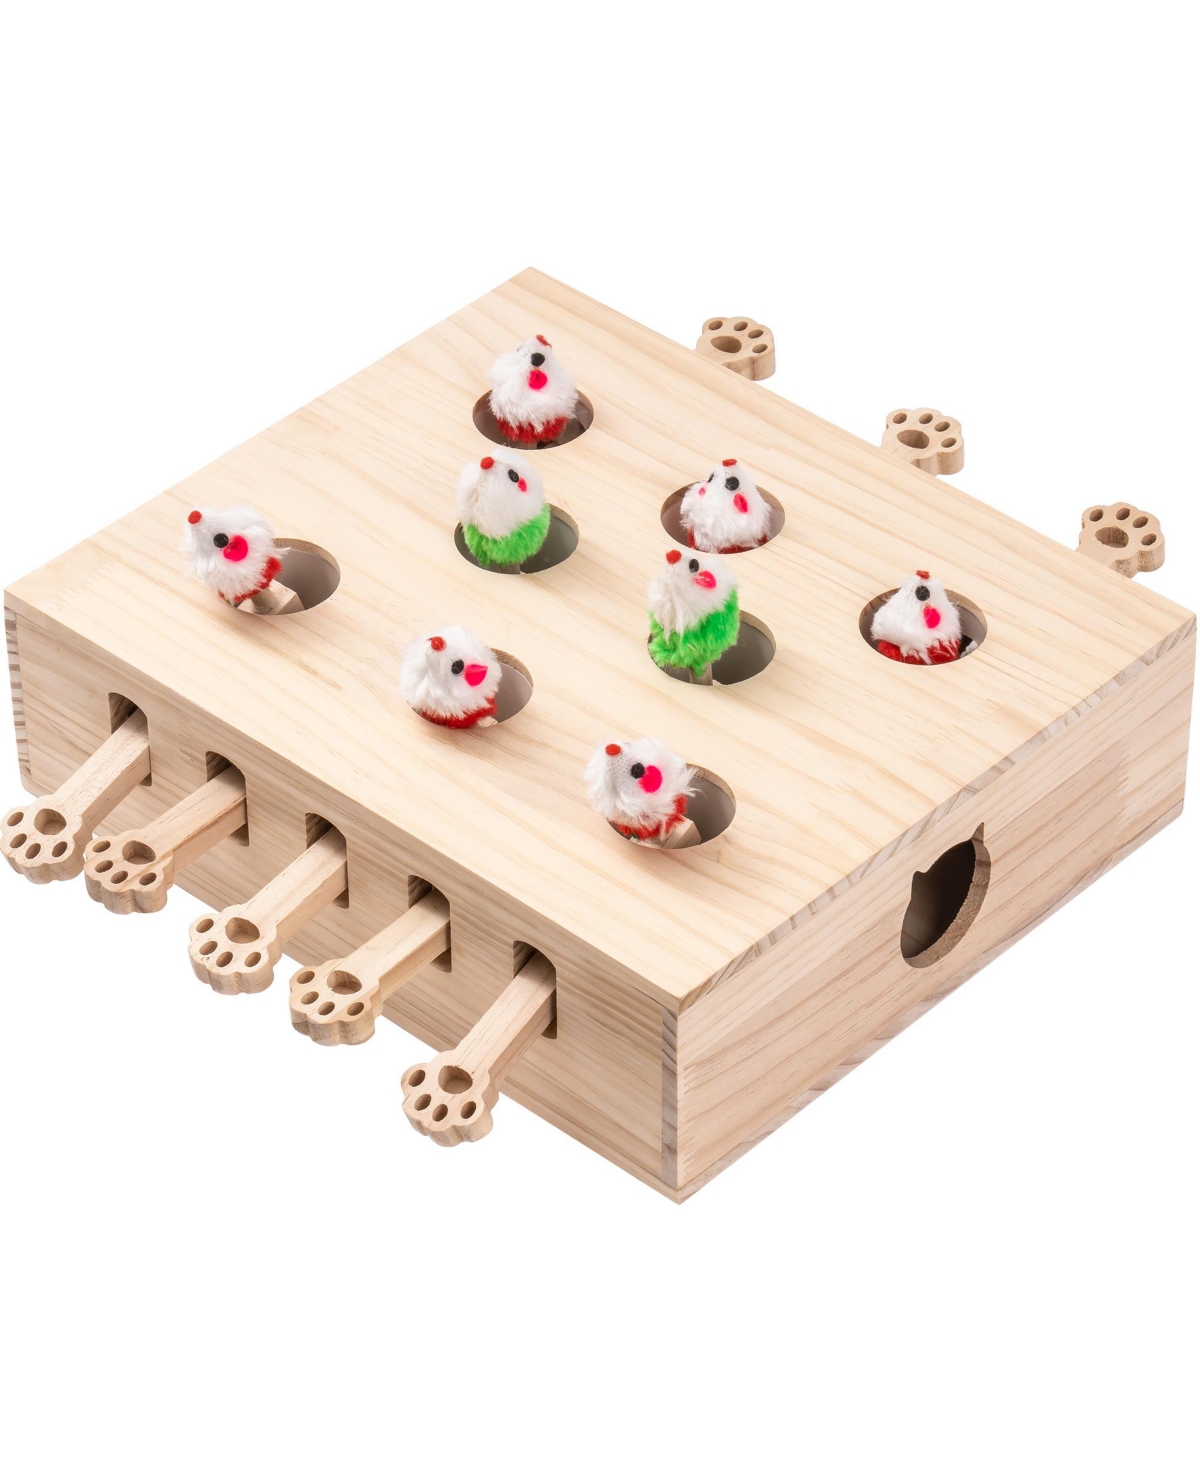 Interactive Whack-a-mole 8 Holes Cat Toy - Solid Wood - Indoor Playtime - Wood